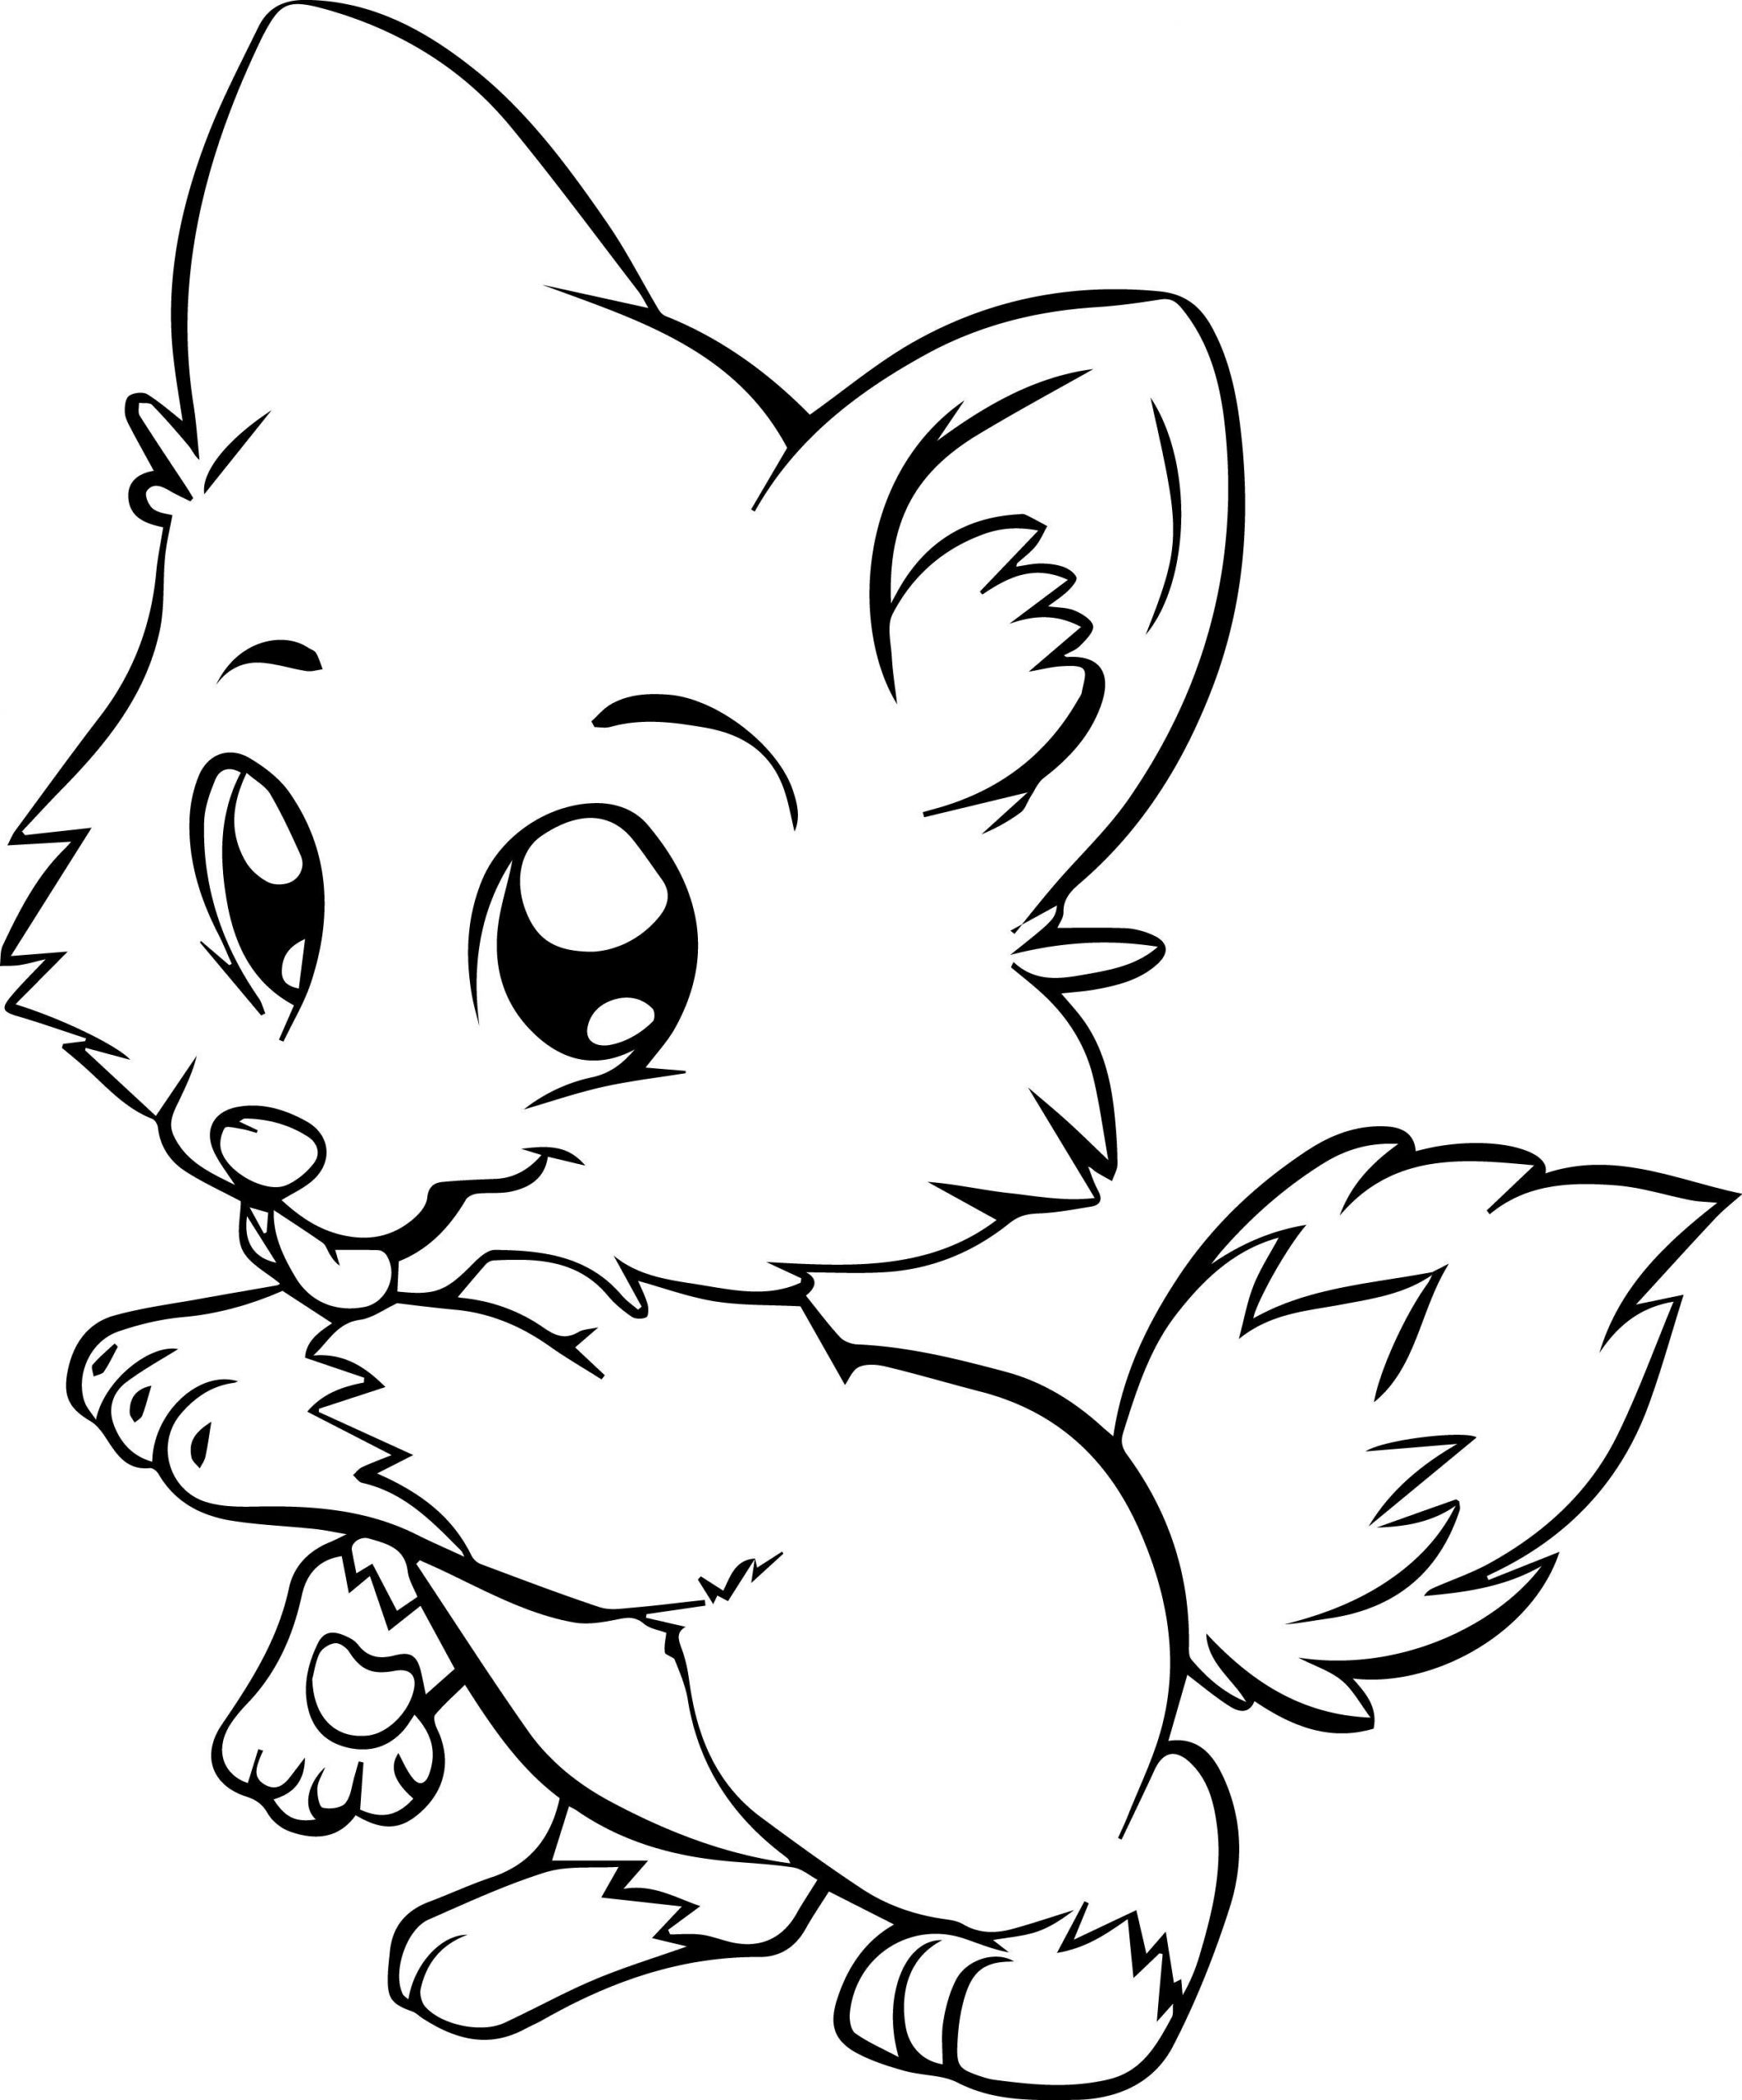 Animal Coloring Pages For Toddlers
 Animal Coloring Page Coloring Pages For Children